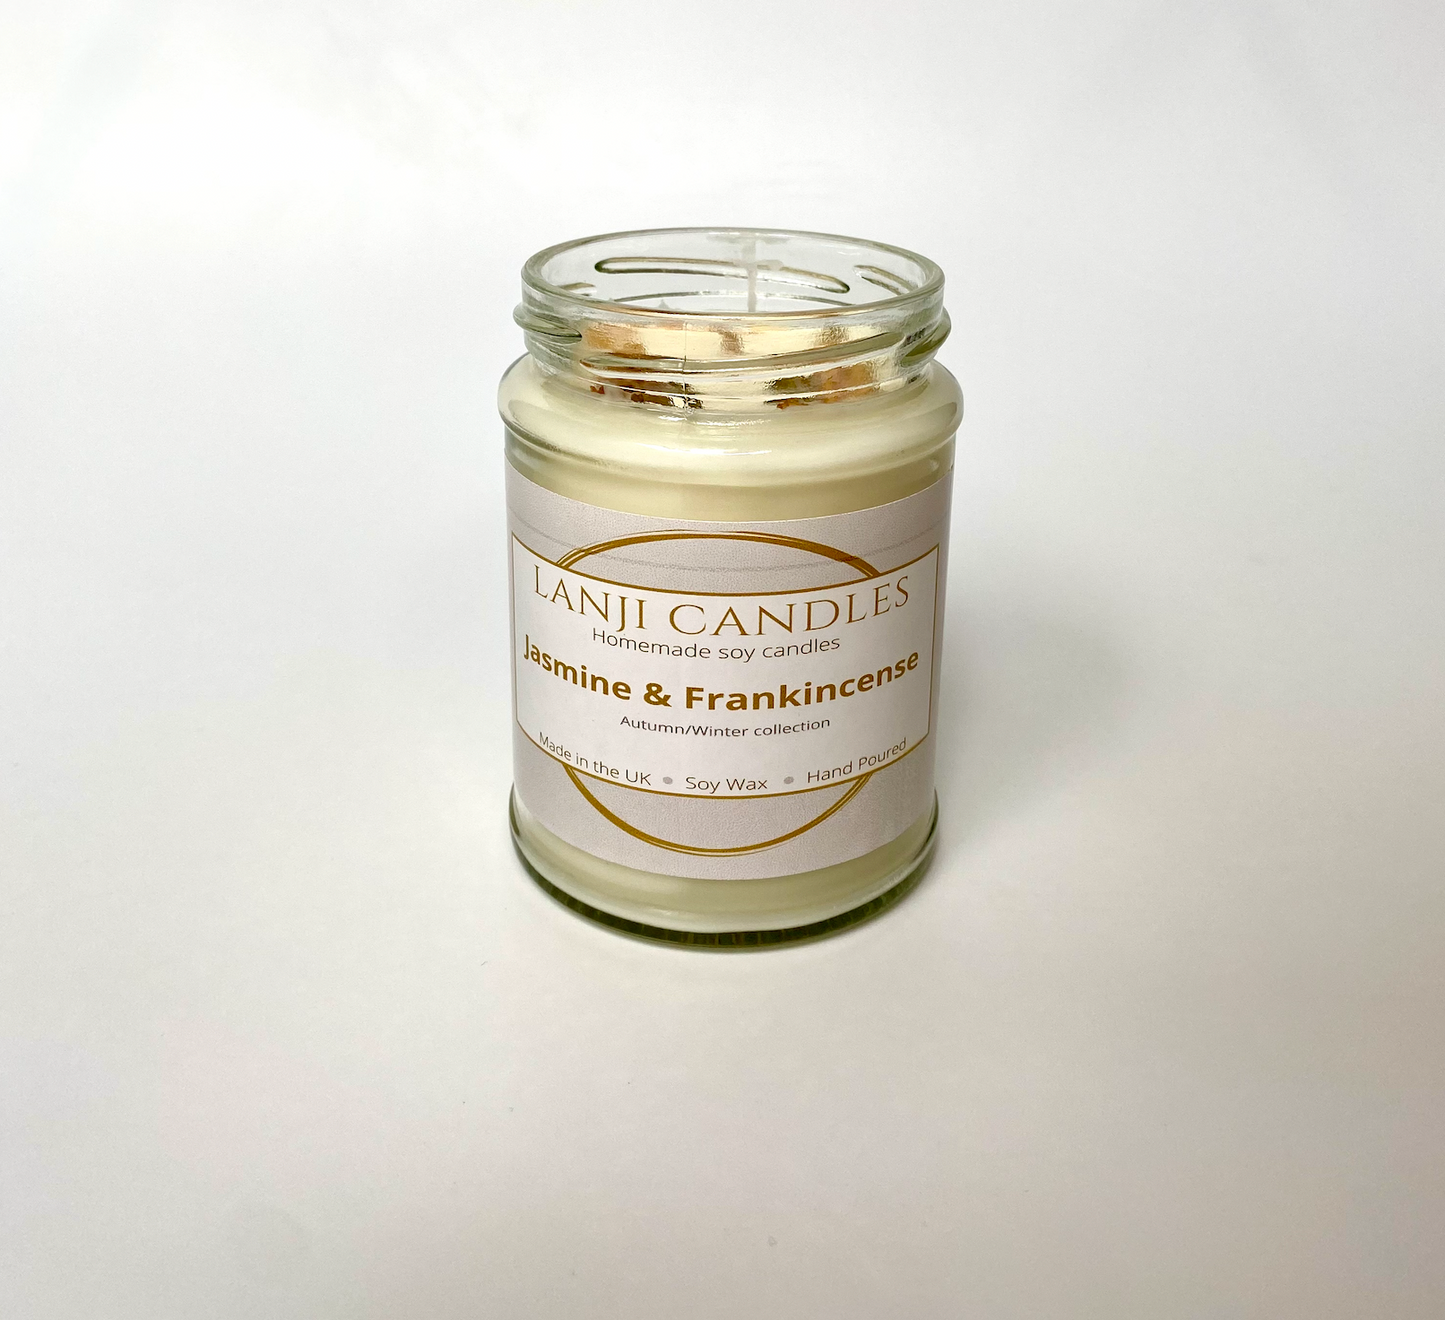 Jasmine & Frankincense Scented Soy Wax Candle